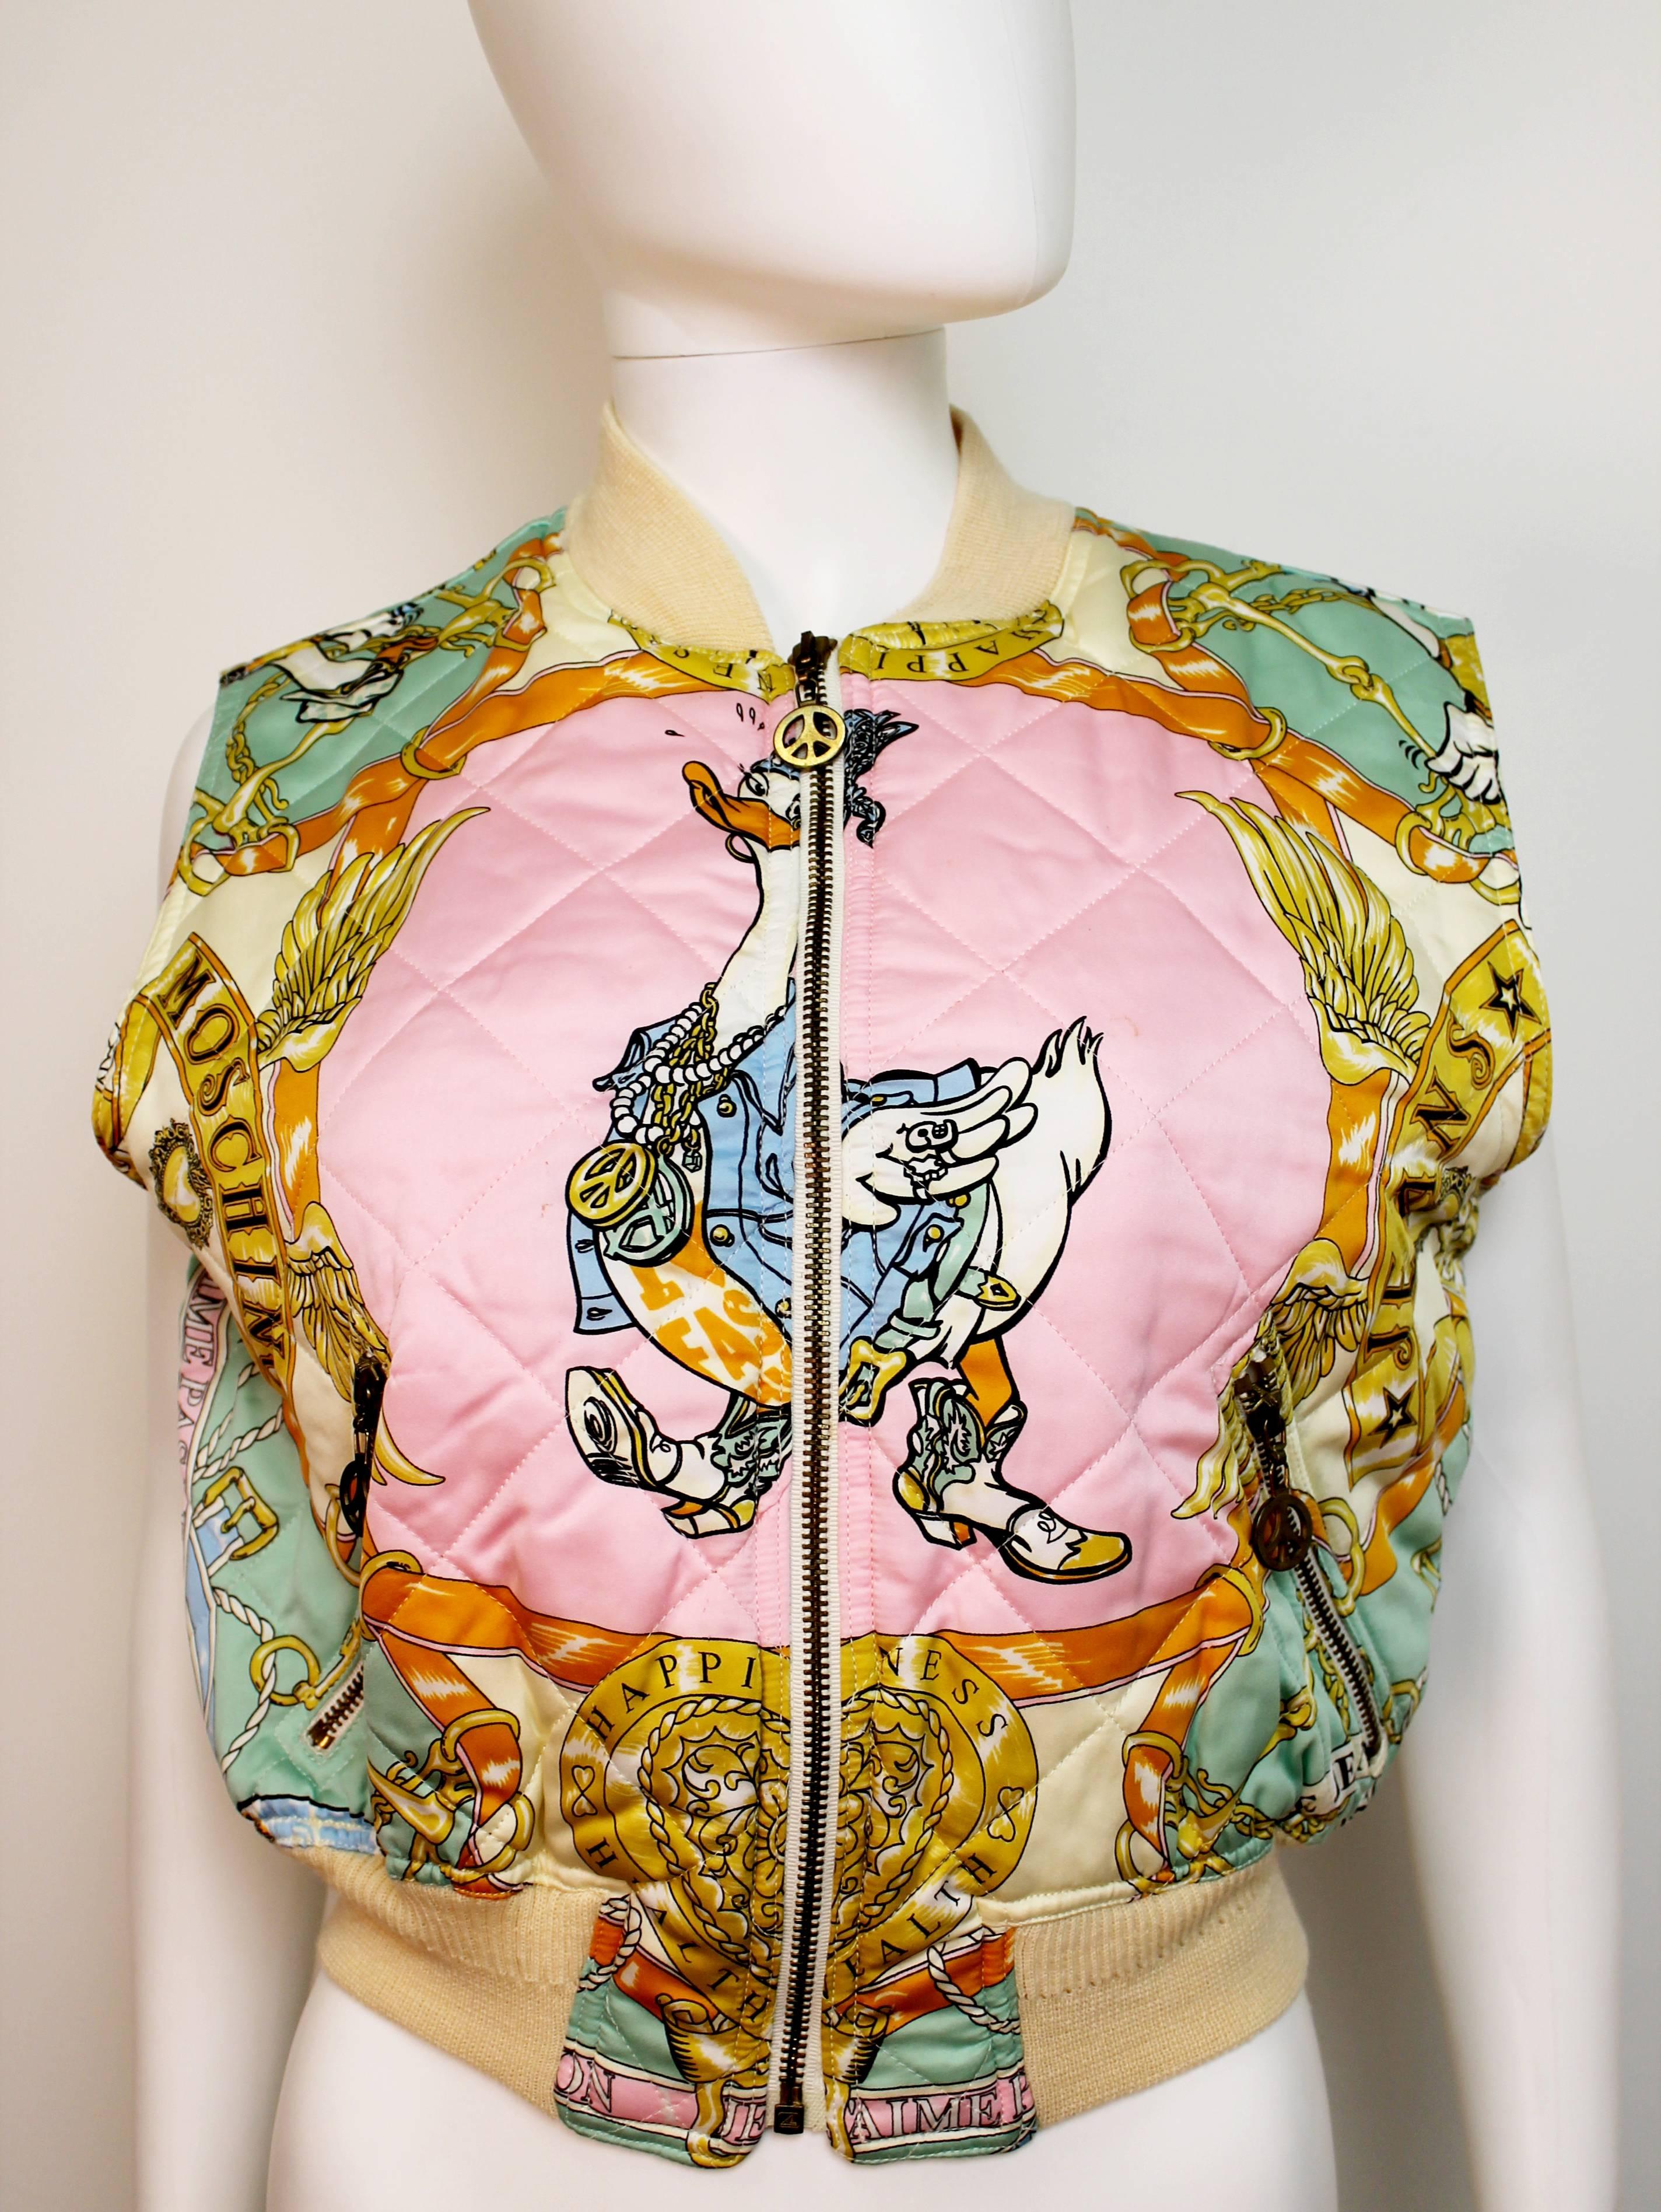 Very rare and collectible duck print quilted gilet from the early 1990's by Moschino Jeans. Features 